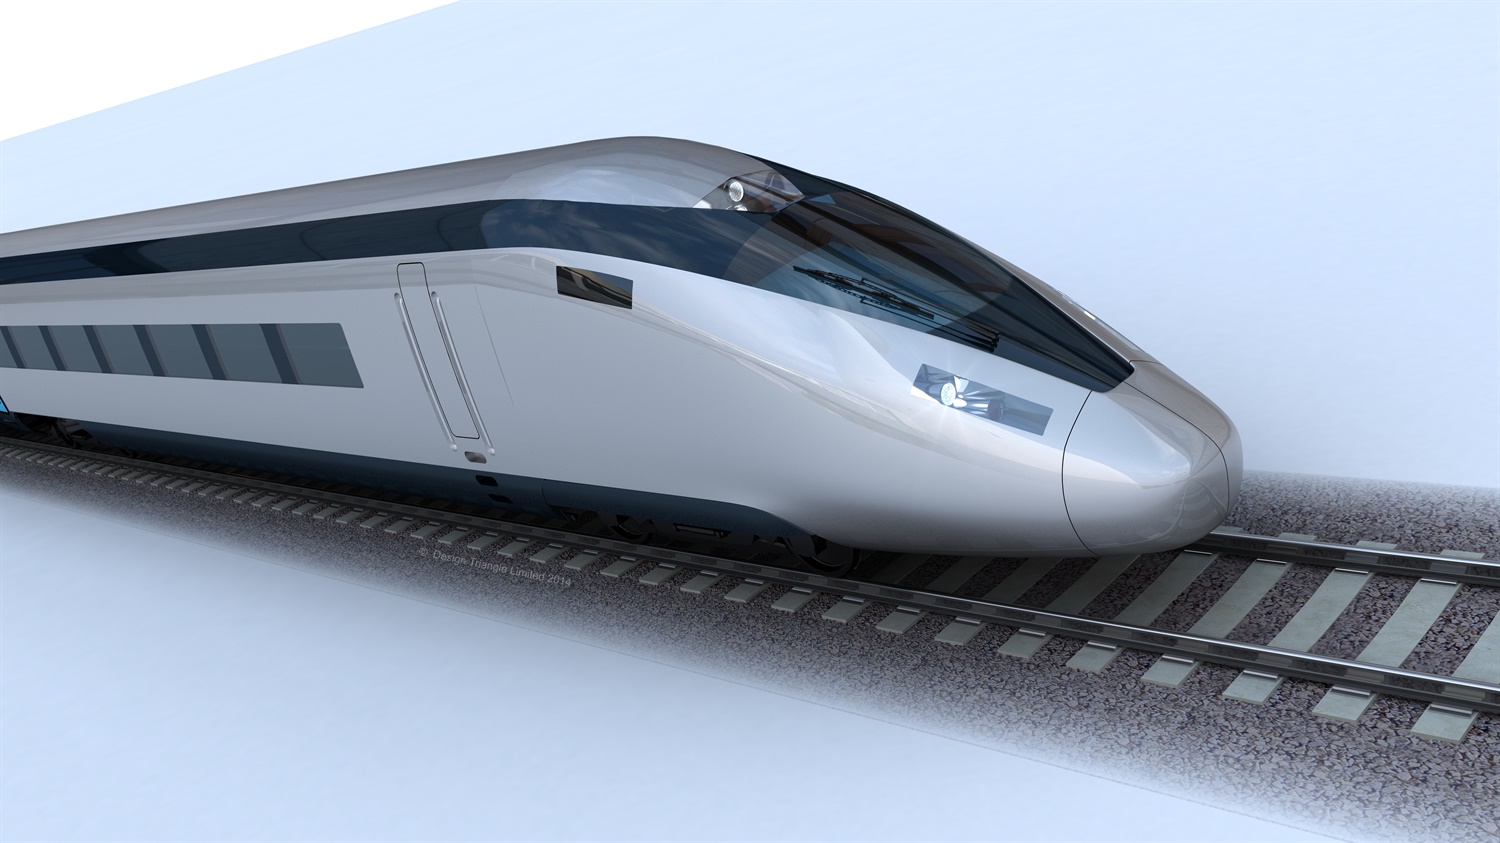 D2N2 approves £300,000 grant to look at benefits of HS2 sites 